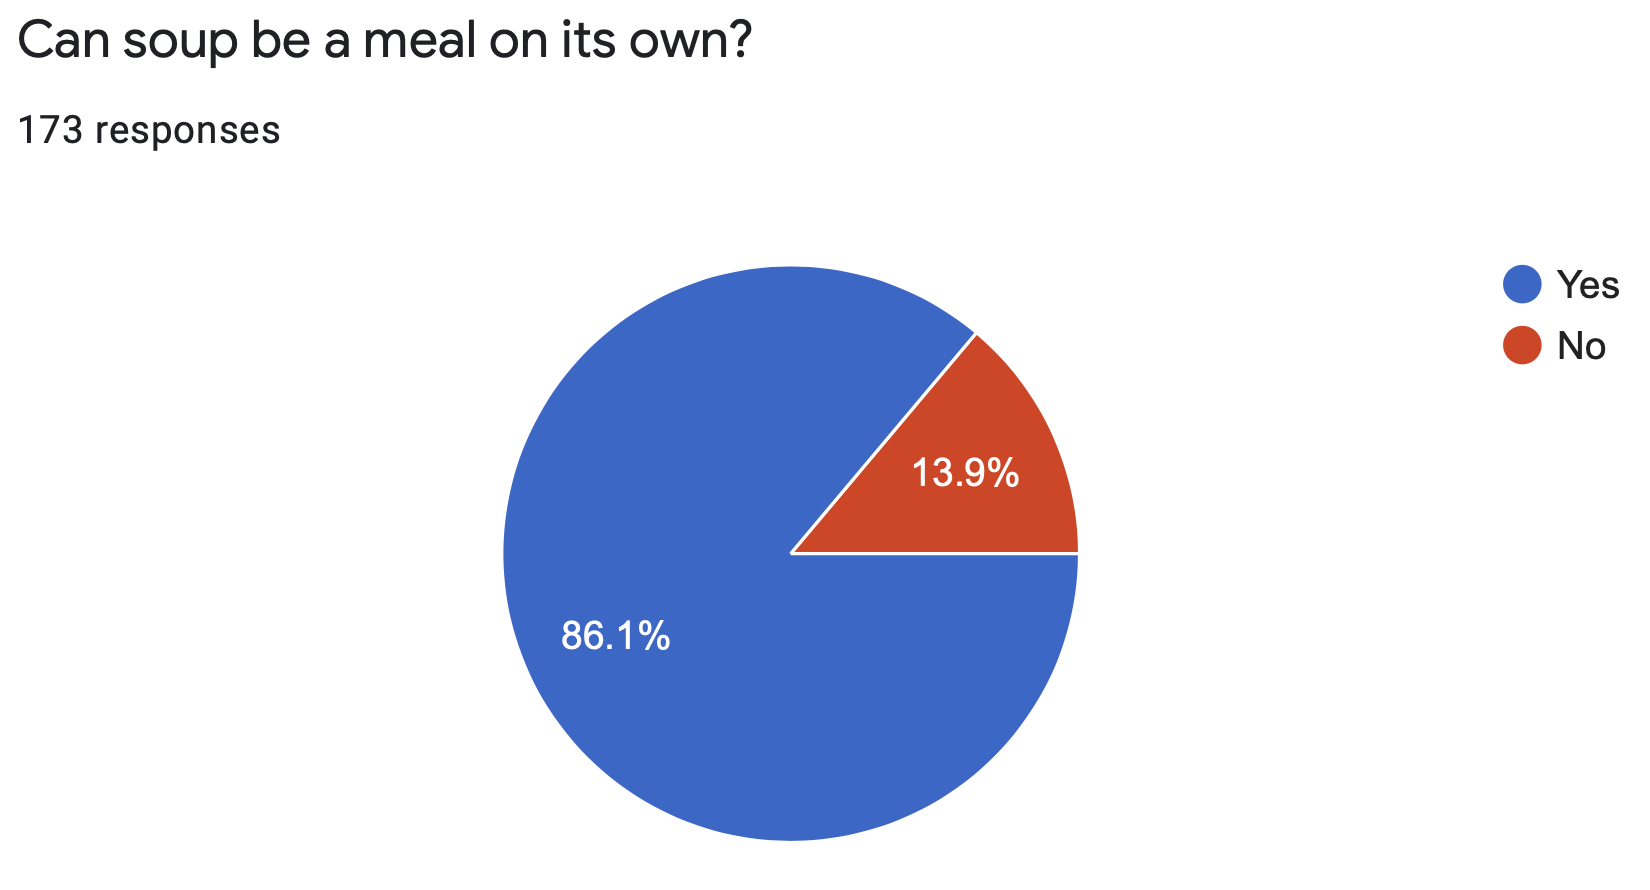 Pie chart showing that most respondents believe soup
can be a meal on its own.